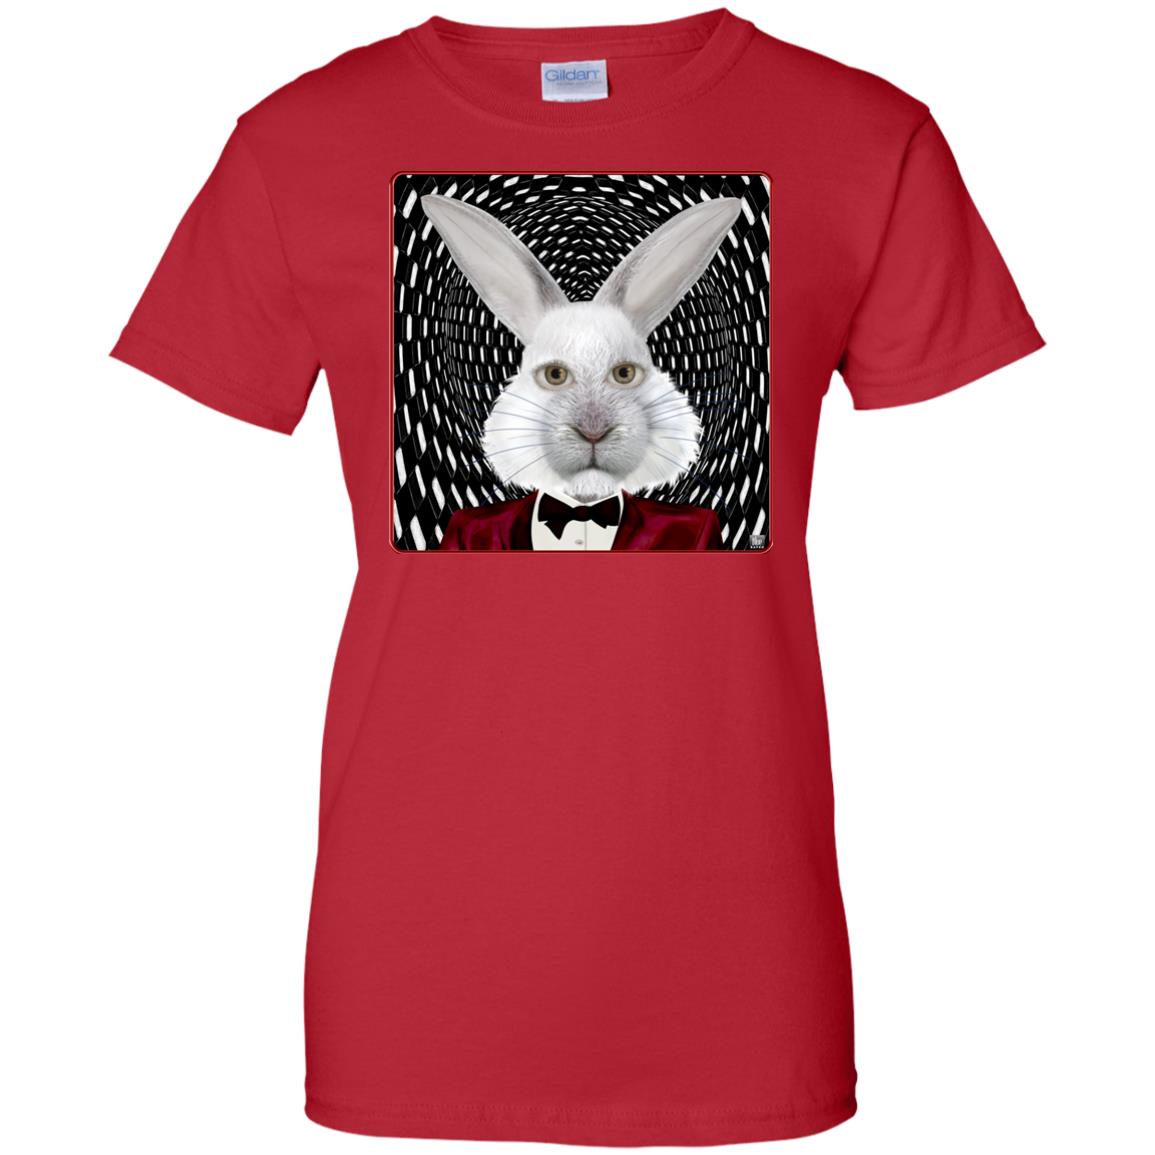 the white rabbit - Women's Relaxed Fit T-Shirt